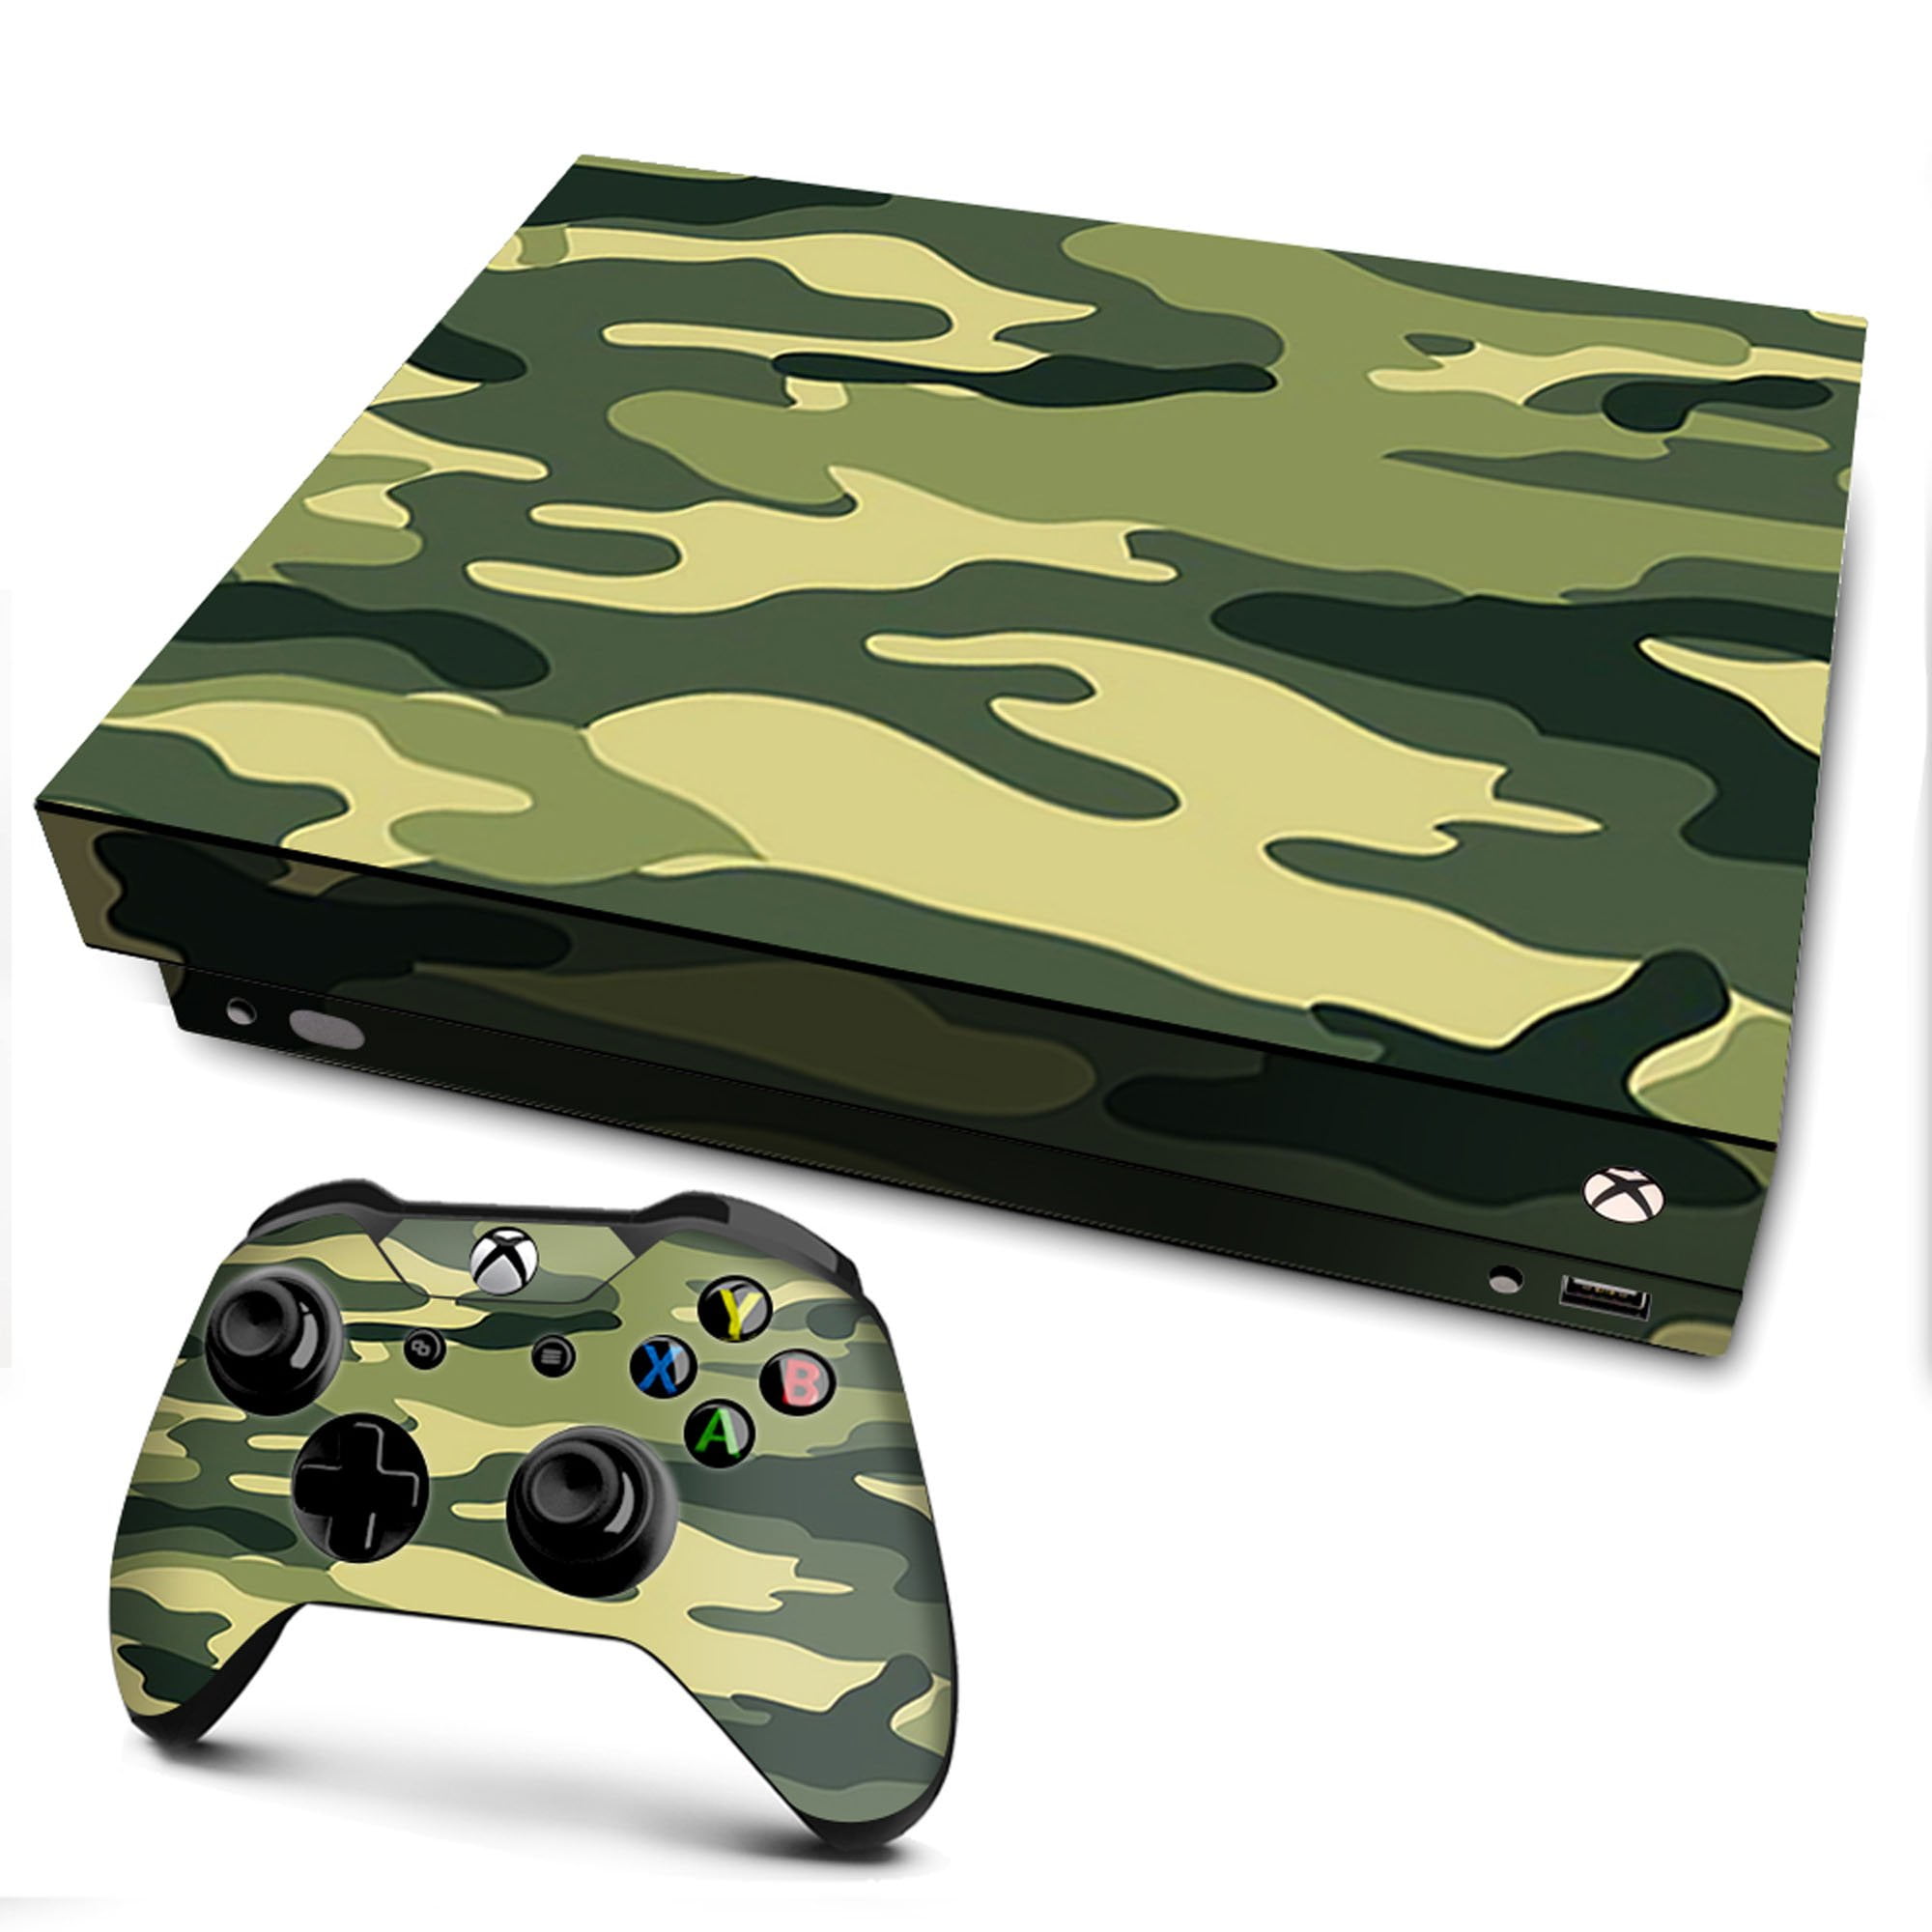 Calligrapher Riskeren definitief Skins Decal Vinyl Wrap for Xbox One X Console - decal stickers skins cover  -Green Camo original Camouflage - Walmart.com